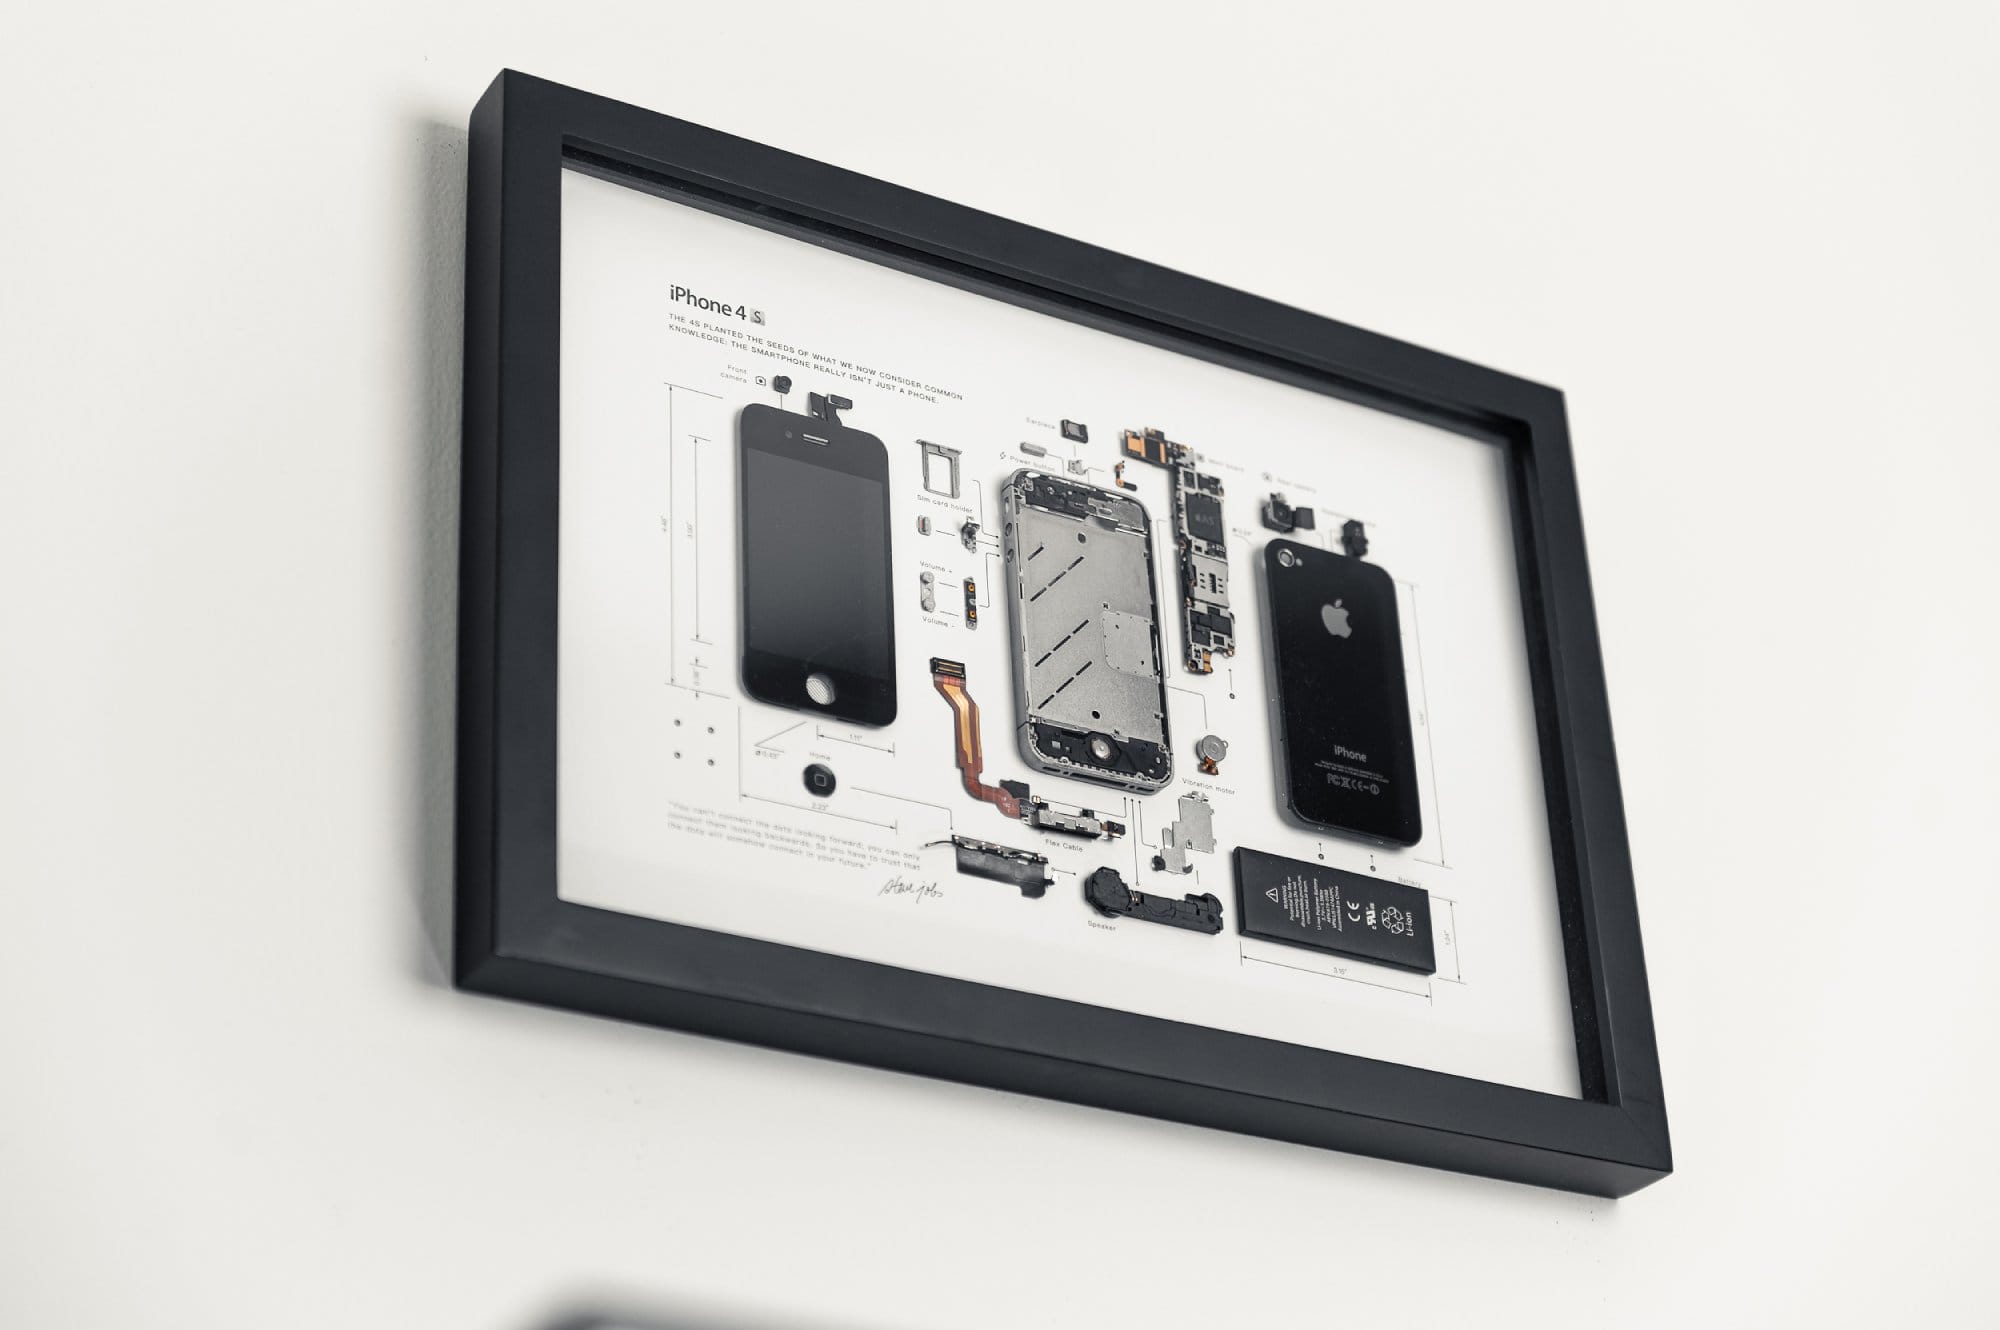 A framed schematic diagram of an iPhone 4s, displaying its disassembled parts, mounted on a white wall